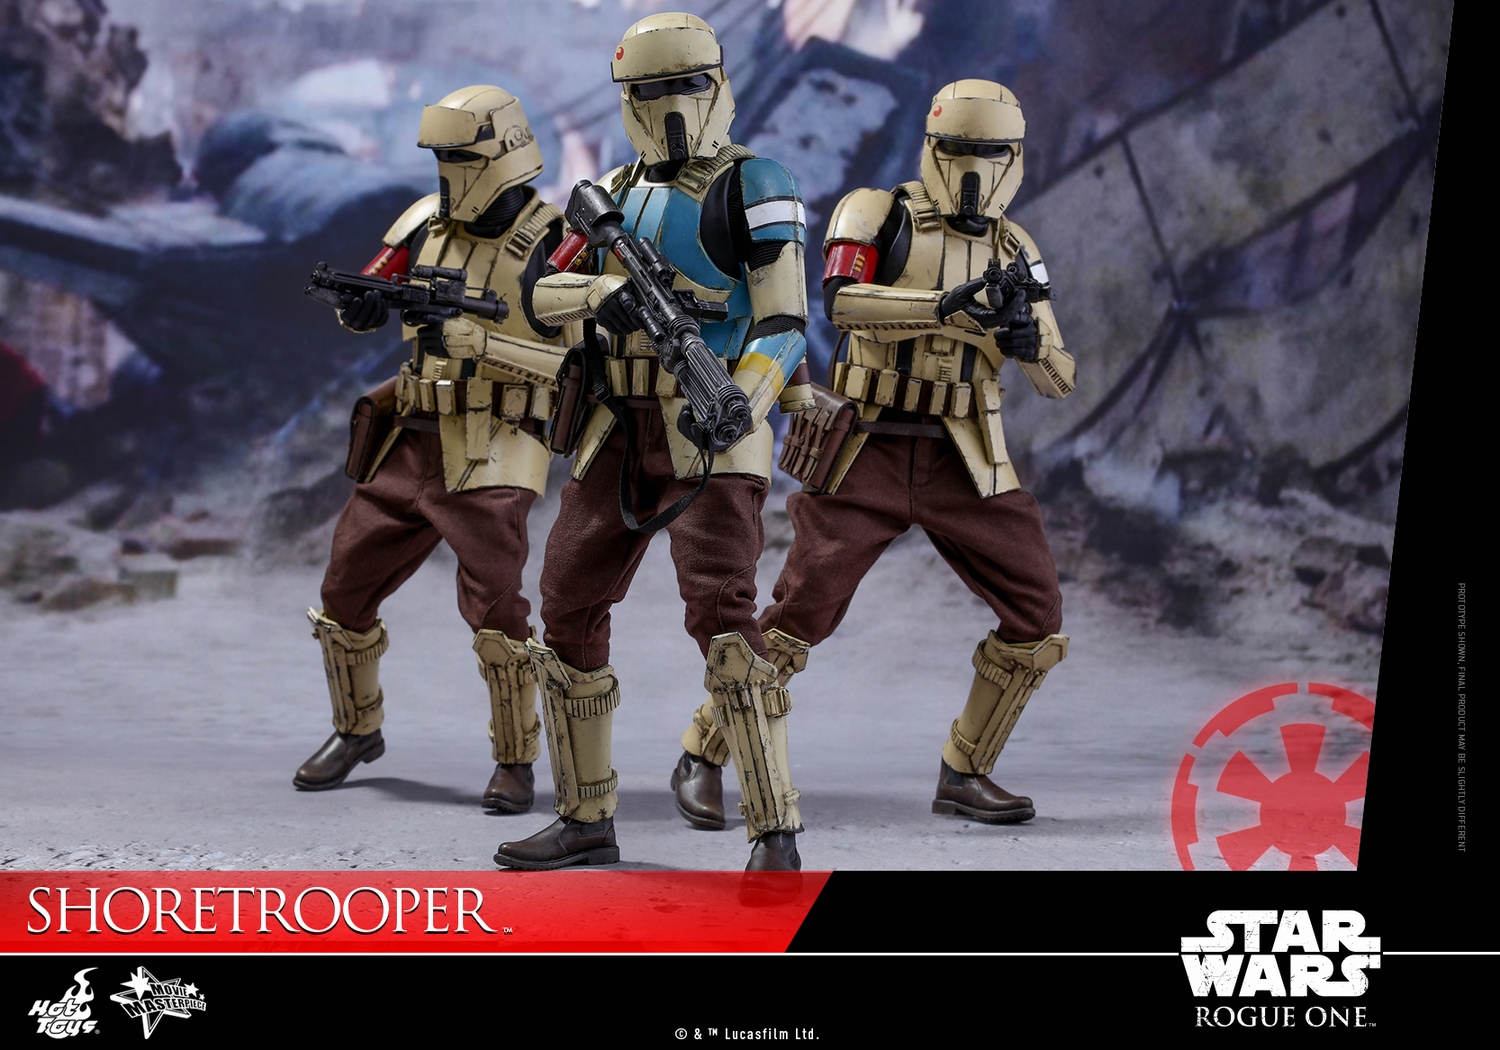 hot-toys-star-wars-rogue-one-shoretrooper-collectible-figure-092916-001.jpg